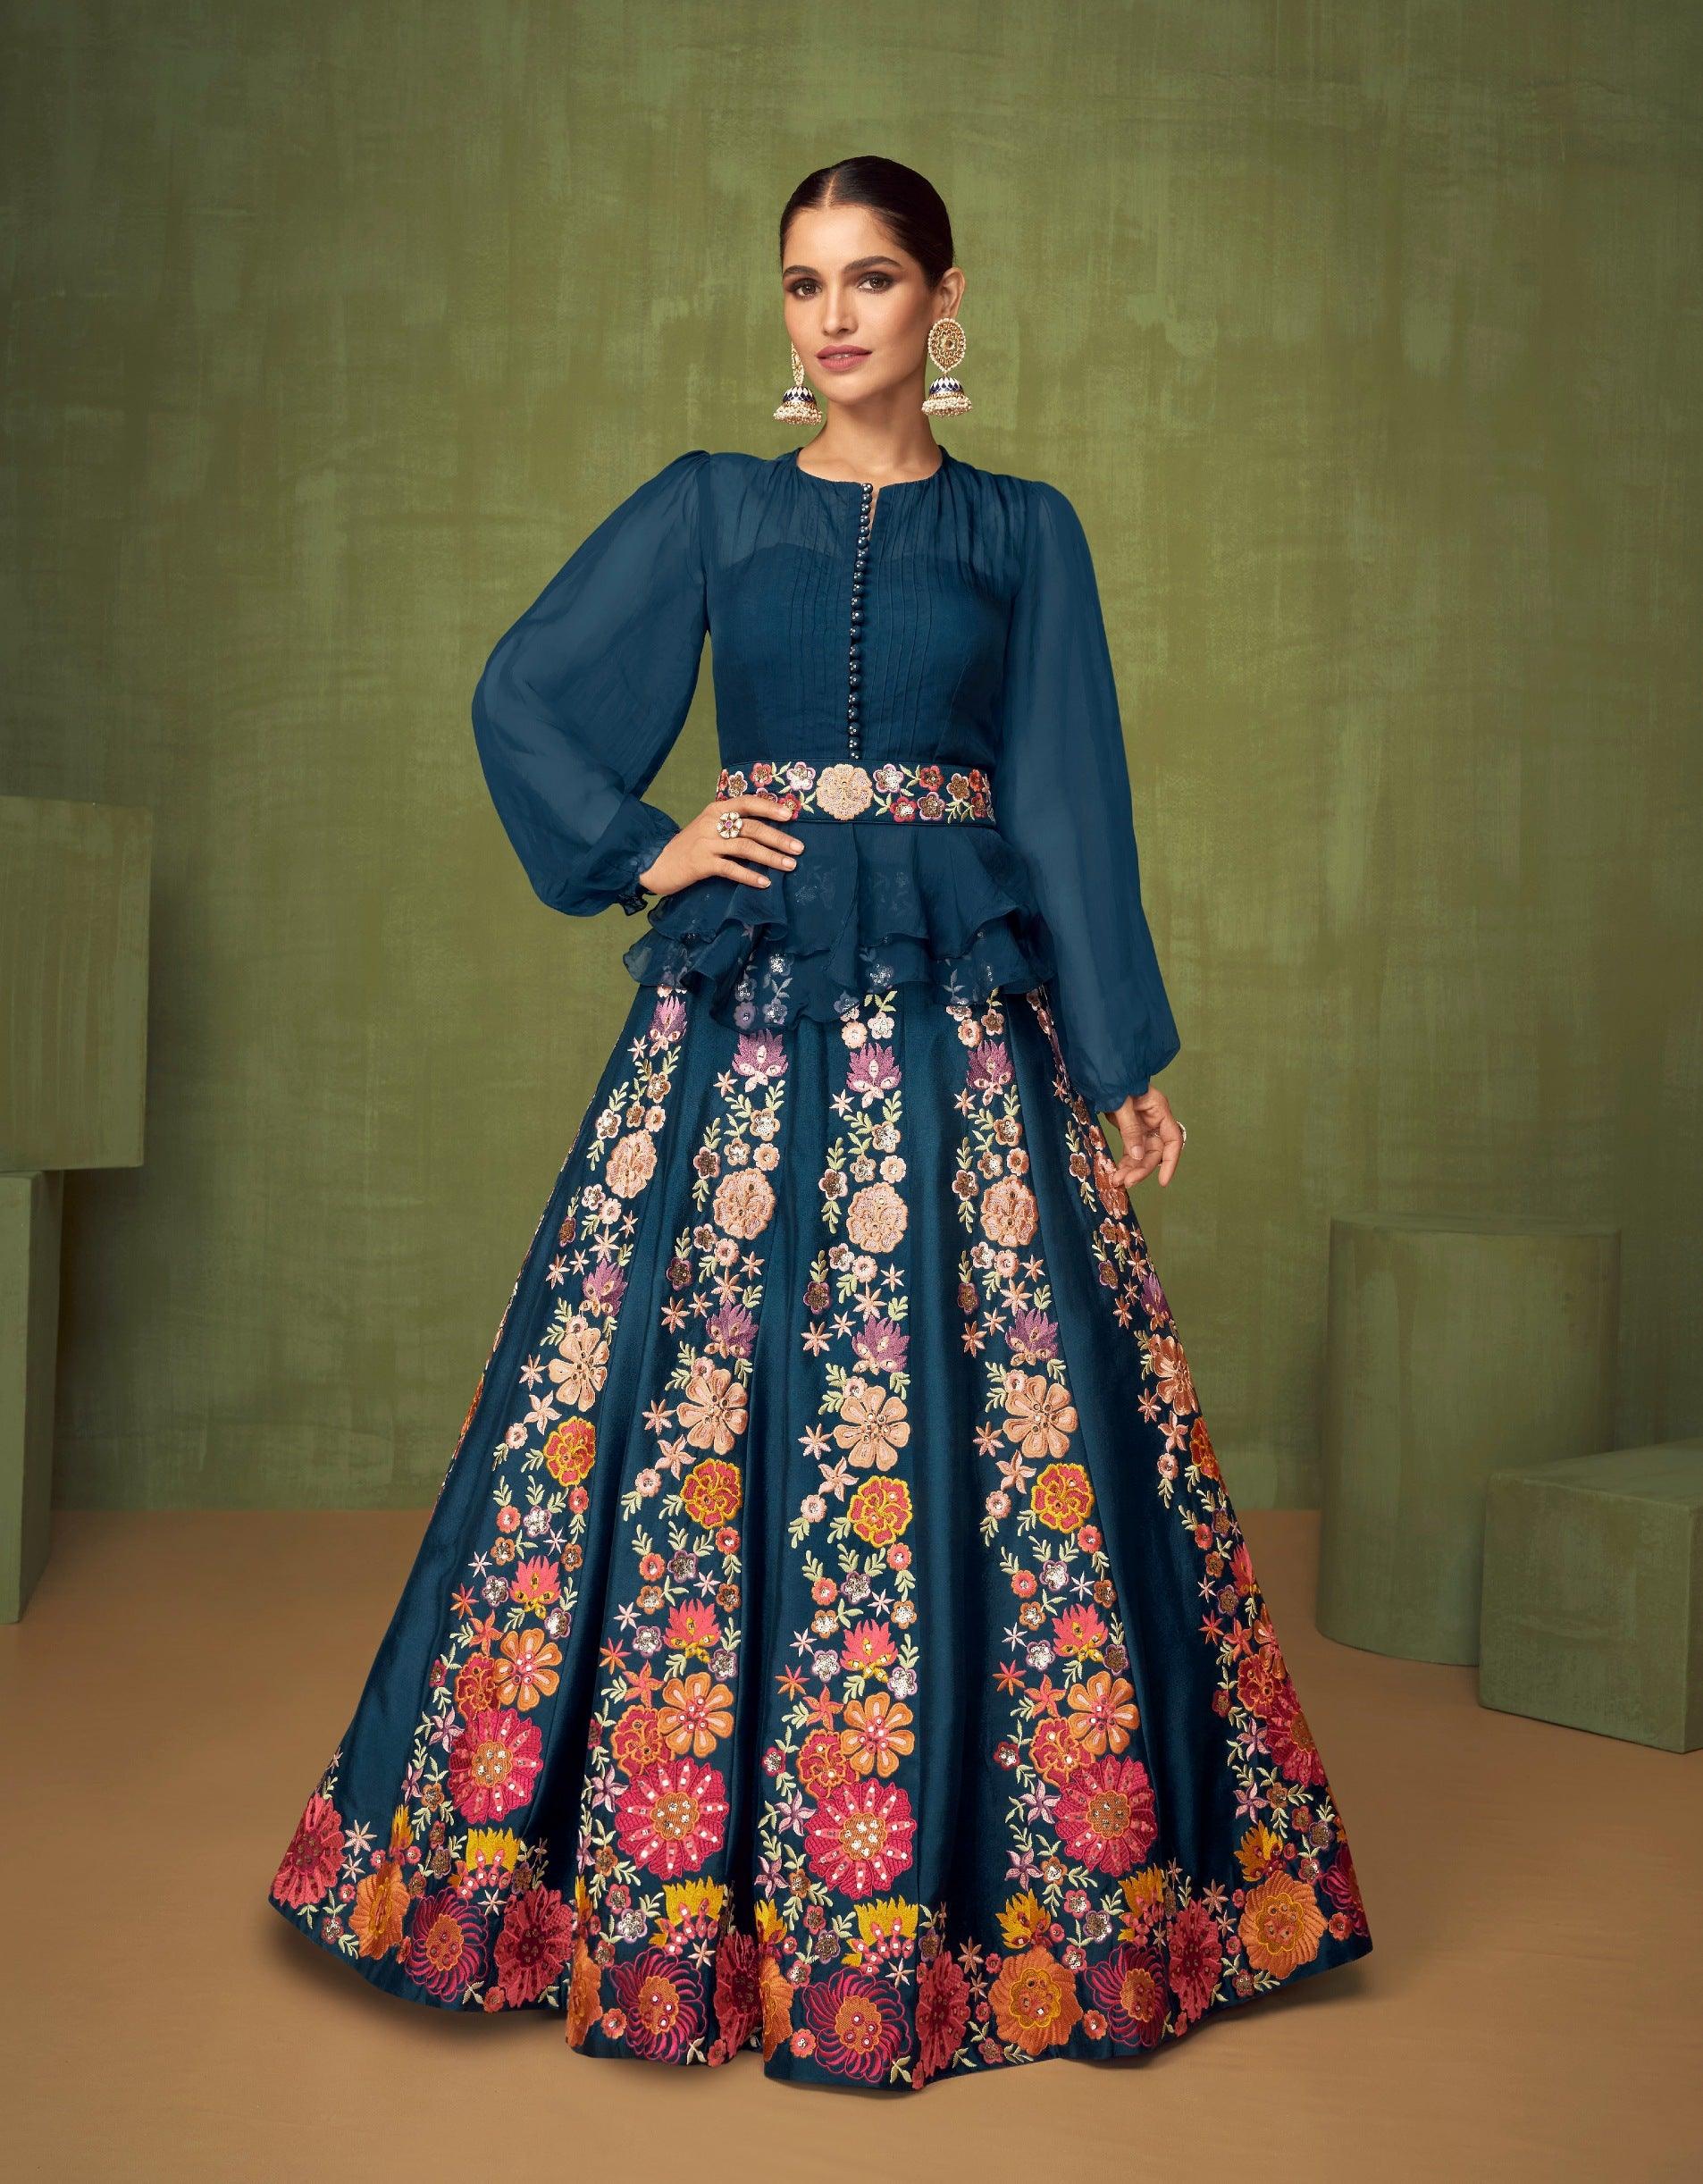 FLOW BY HIVA SOFT SILK BOOK ONLINE LATEST EXCLUSIVE FANCY SUPER STYLISH DESIGNER  PARTY WEAR BOLLYWOOD STYLE STUNNING FABULOUS LONG FLAIRED READYMADE RED  CARPET GOWNS LATEST FASHION DRESSES SUPPLIER IN INDIA MAURITIUS